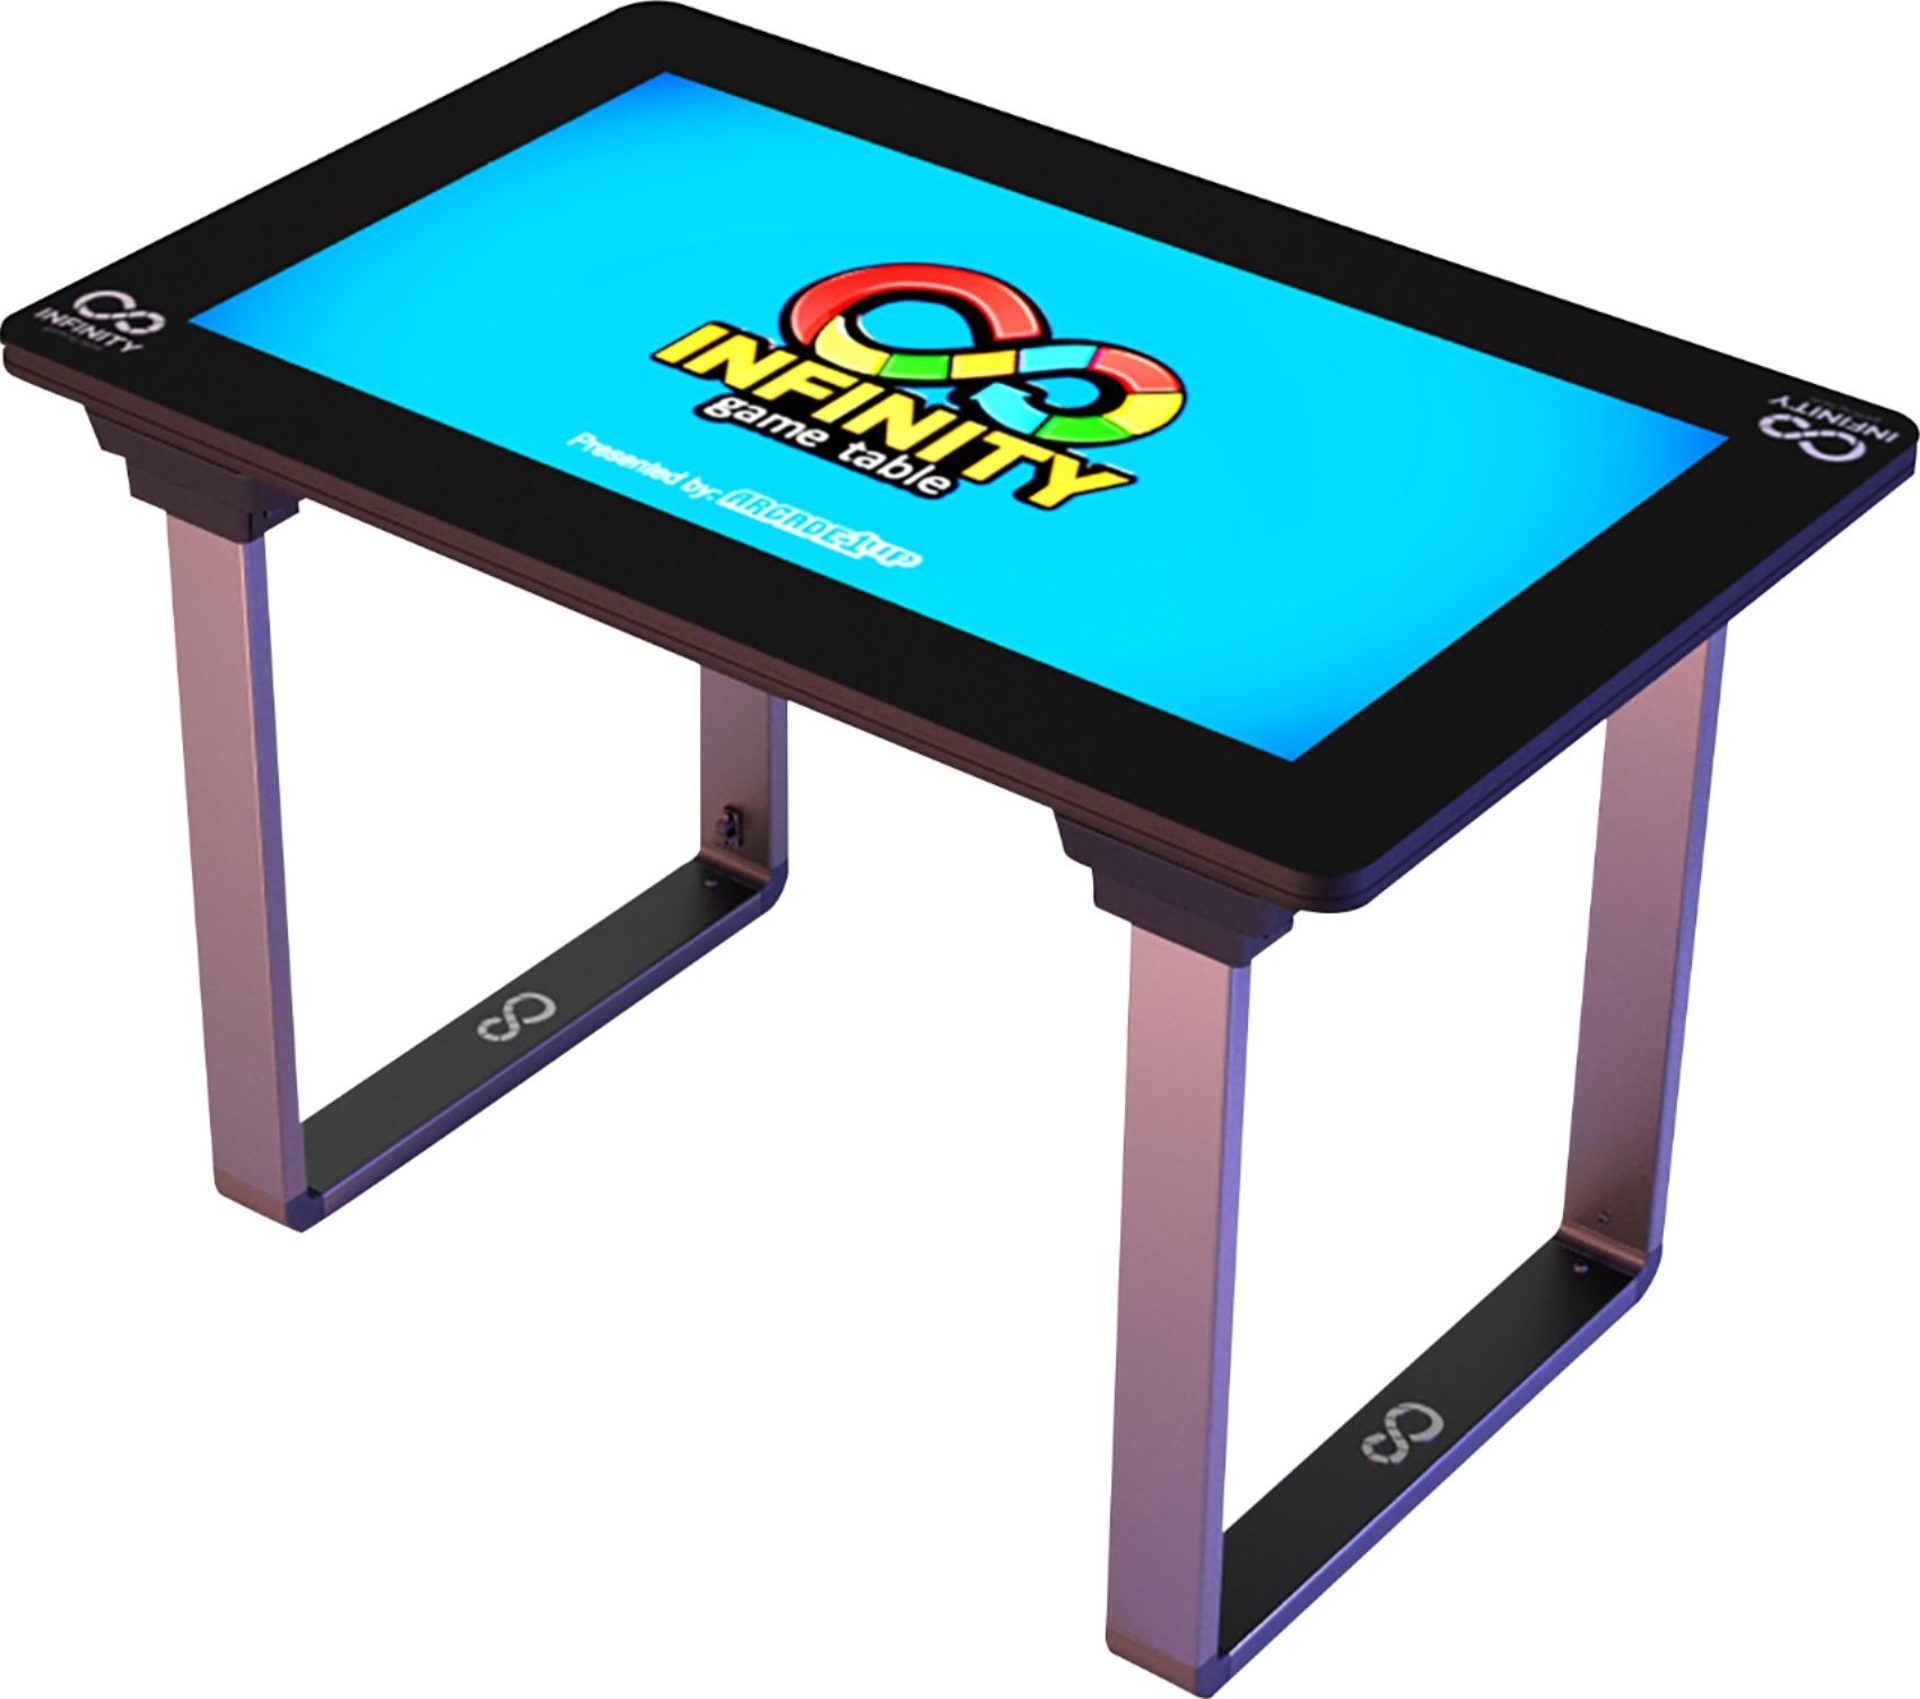 ARCADE 1 Up - Infinity Game Table